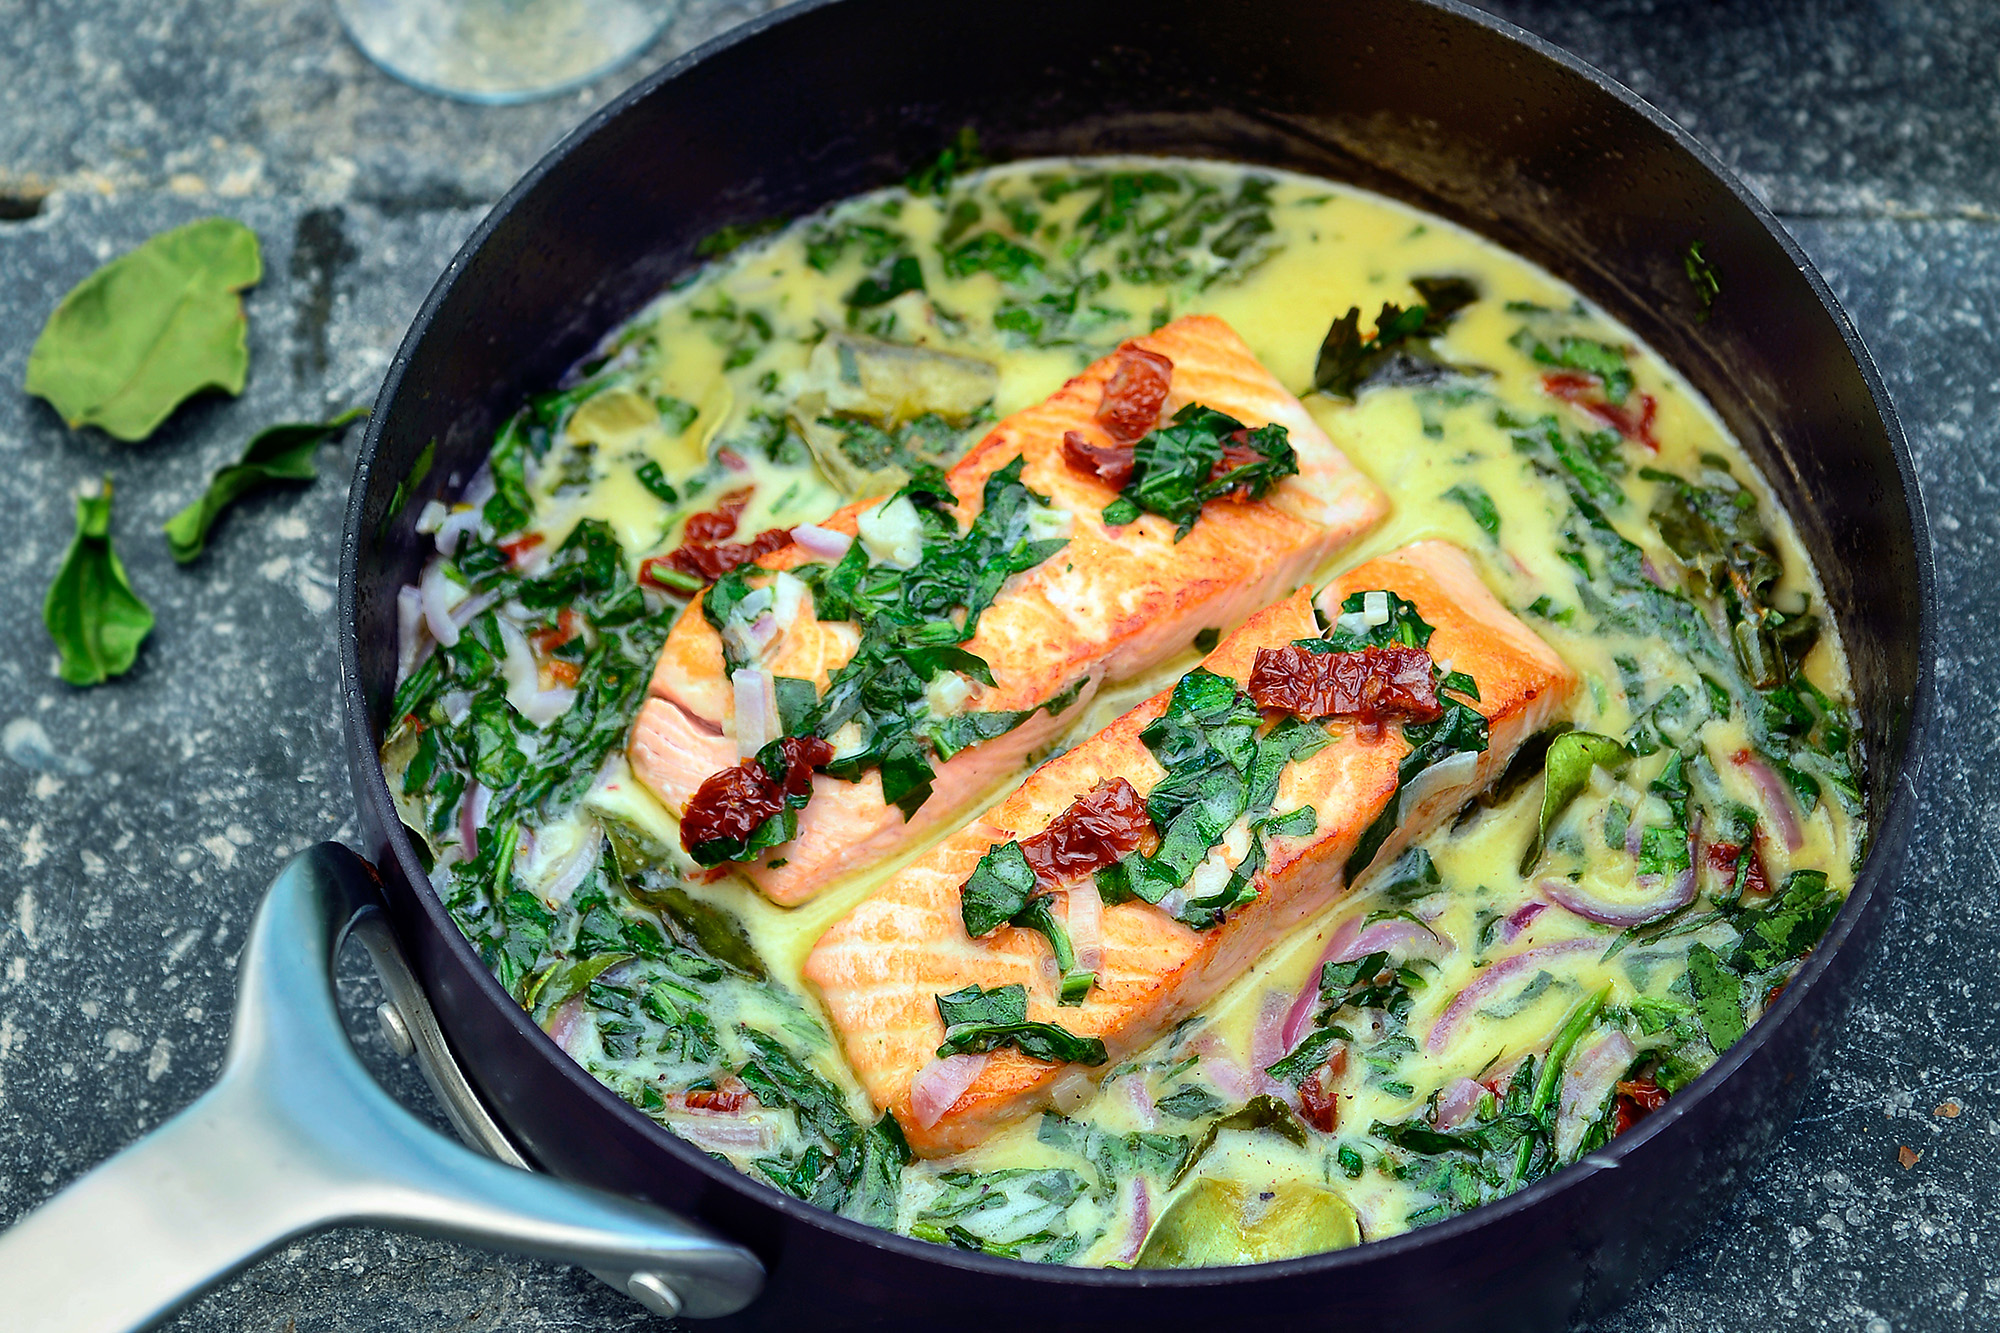 Fried salmon in deliciously spicy coconut milk sauce (keto)